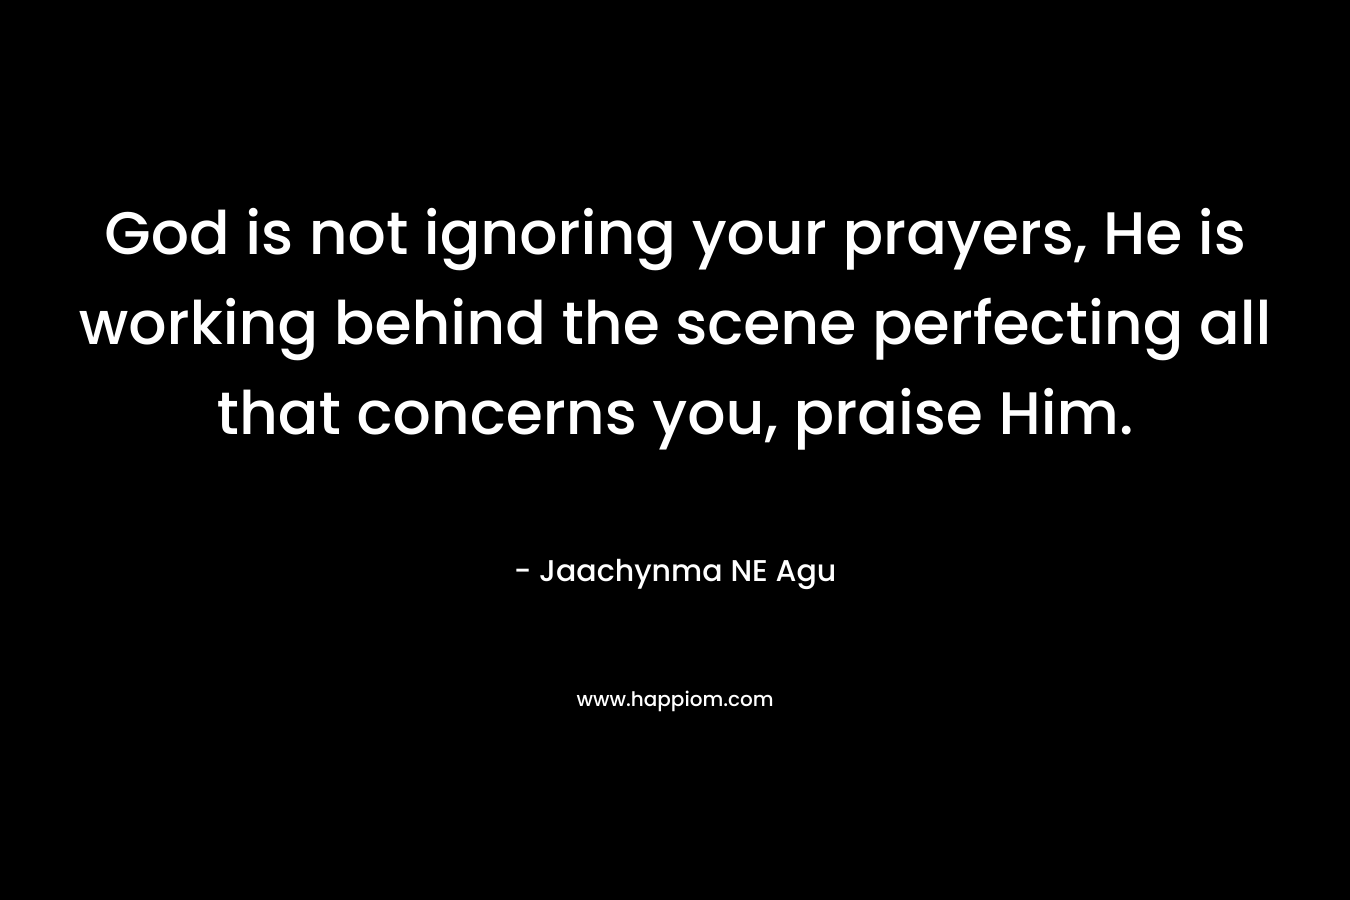 God is not ignoring your prayers, He is working behind the scene perfecting all that concerns you, praise Him. – Jaachynma NE Agu